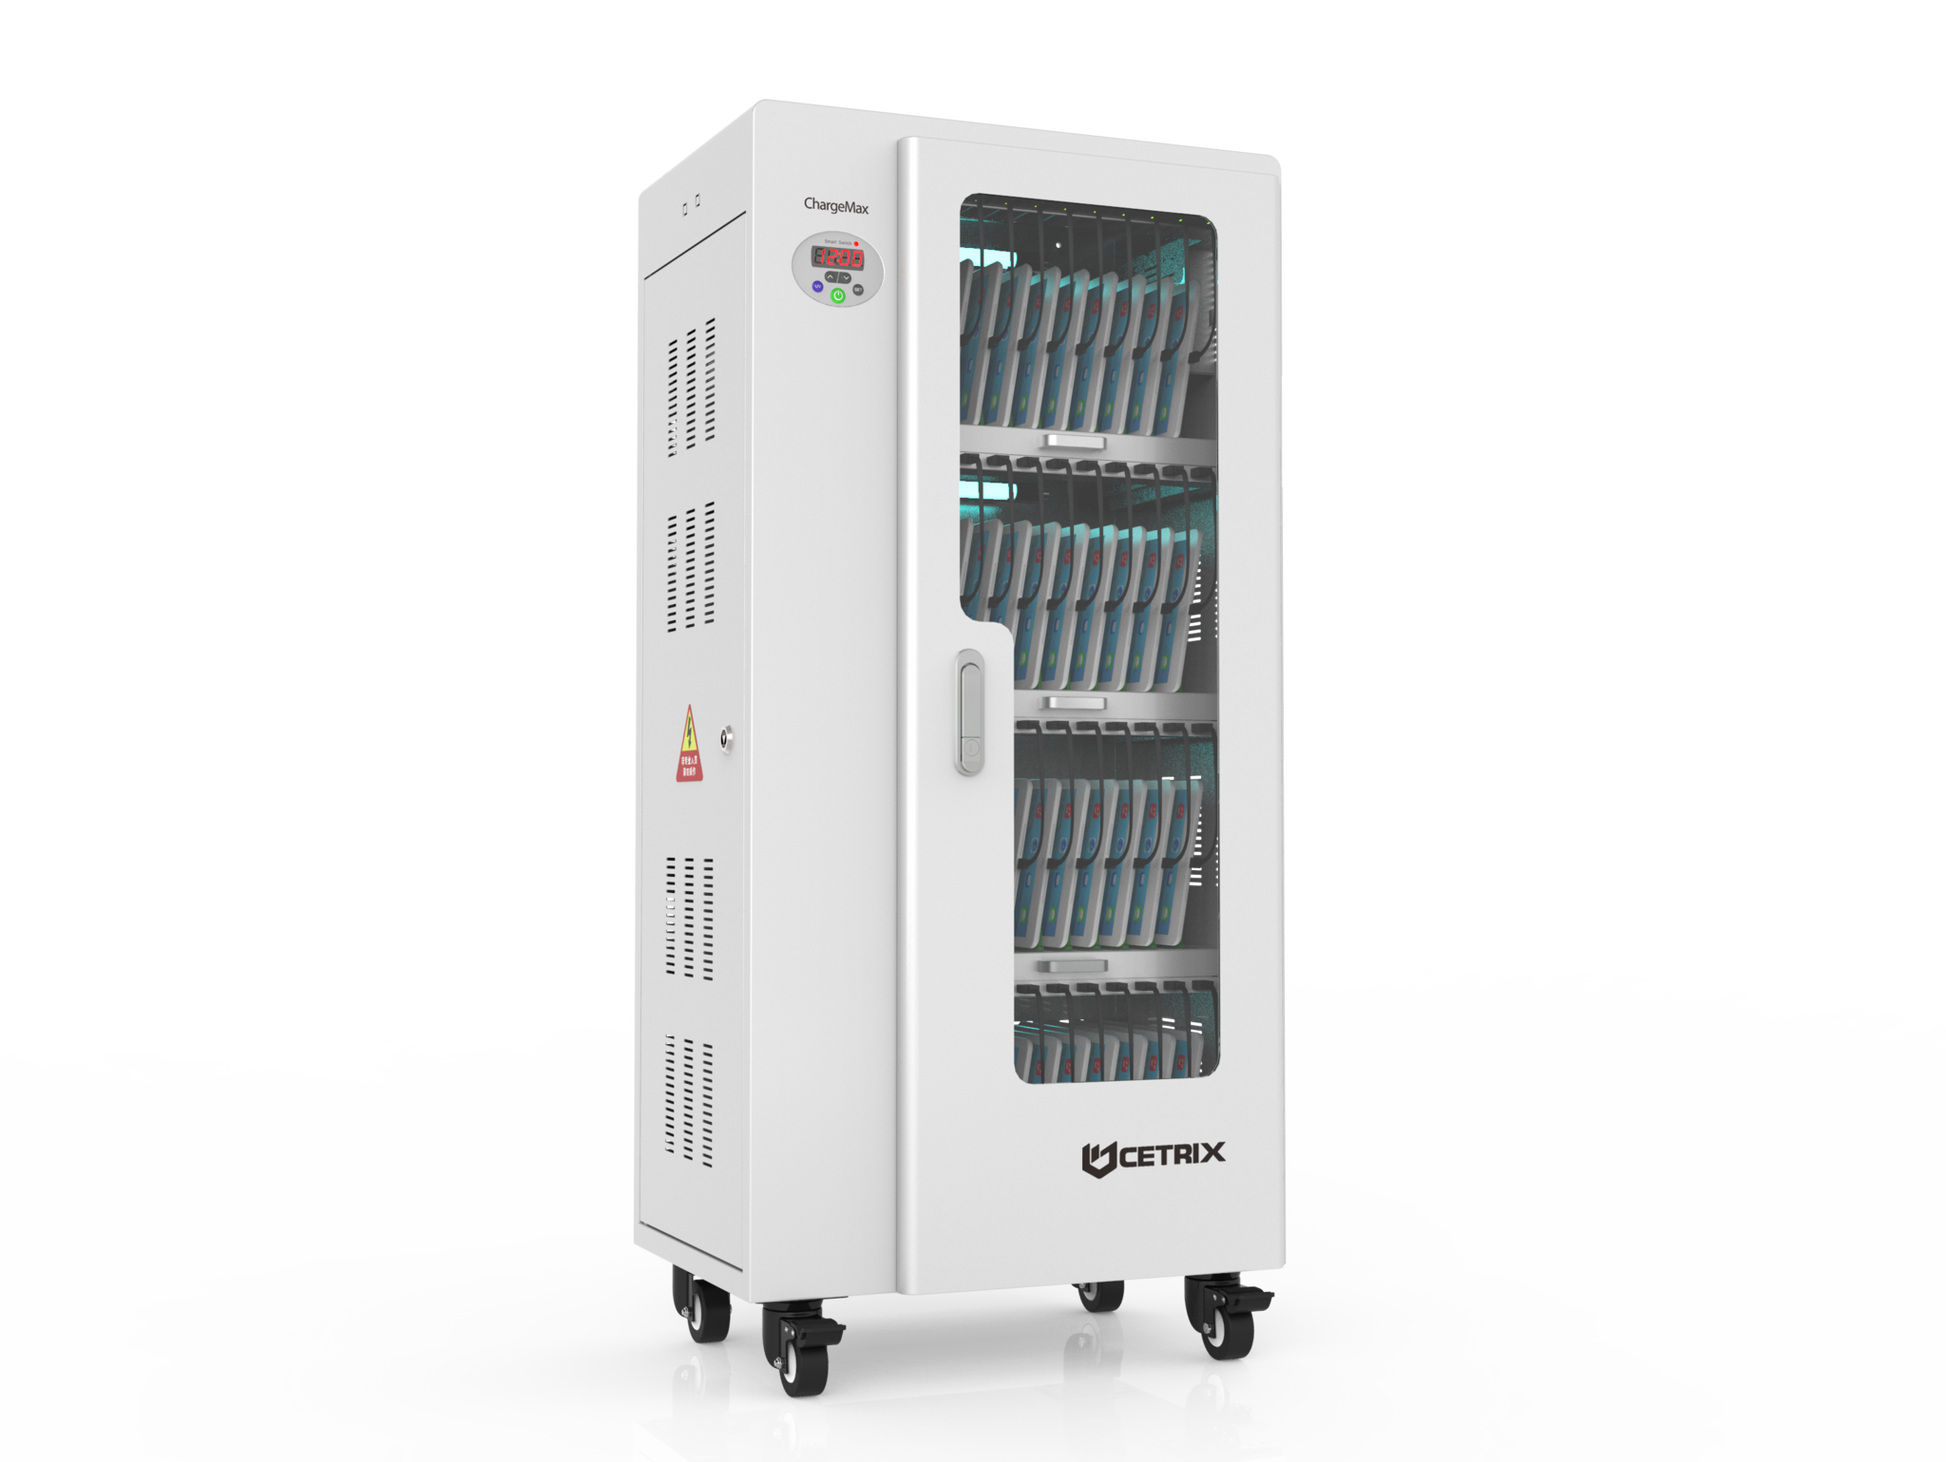 ChargeMax Disinfection Charging Cabinet - 40 bays, 4 Level (CT-40BU) - The cabinet is designed to be safe and durable, with a transparent door for monitoring, and four sturdy wheels with front brakes for easy moving and parking.